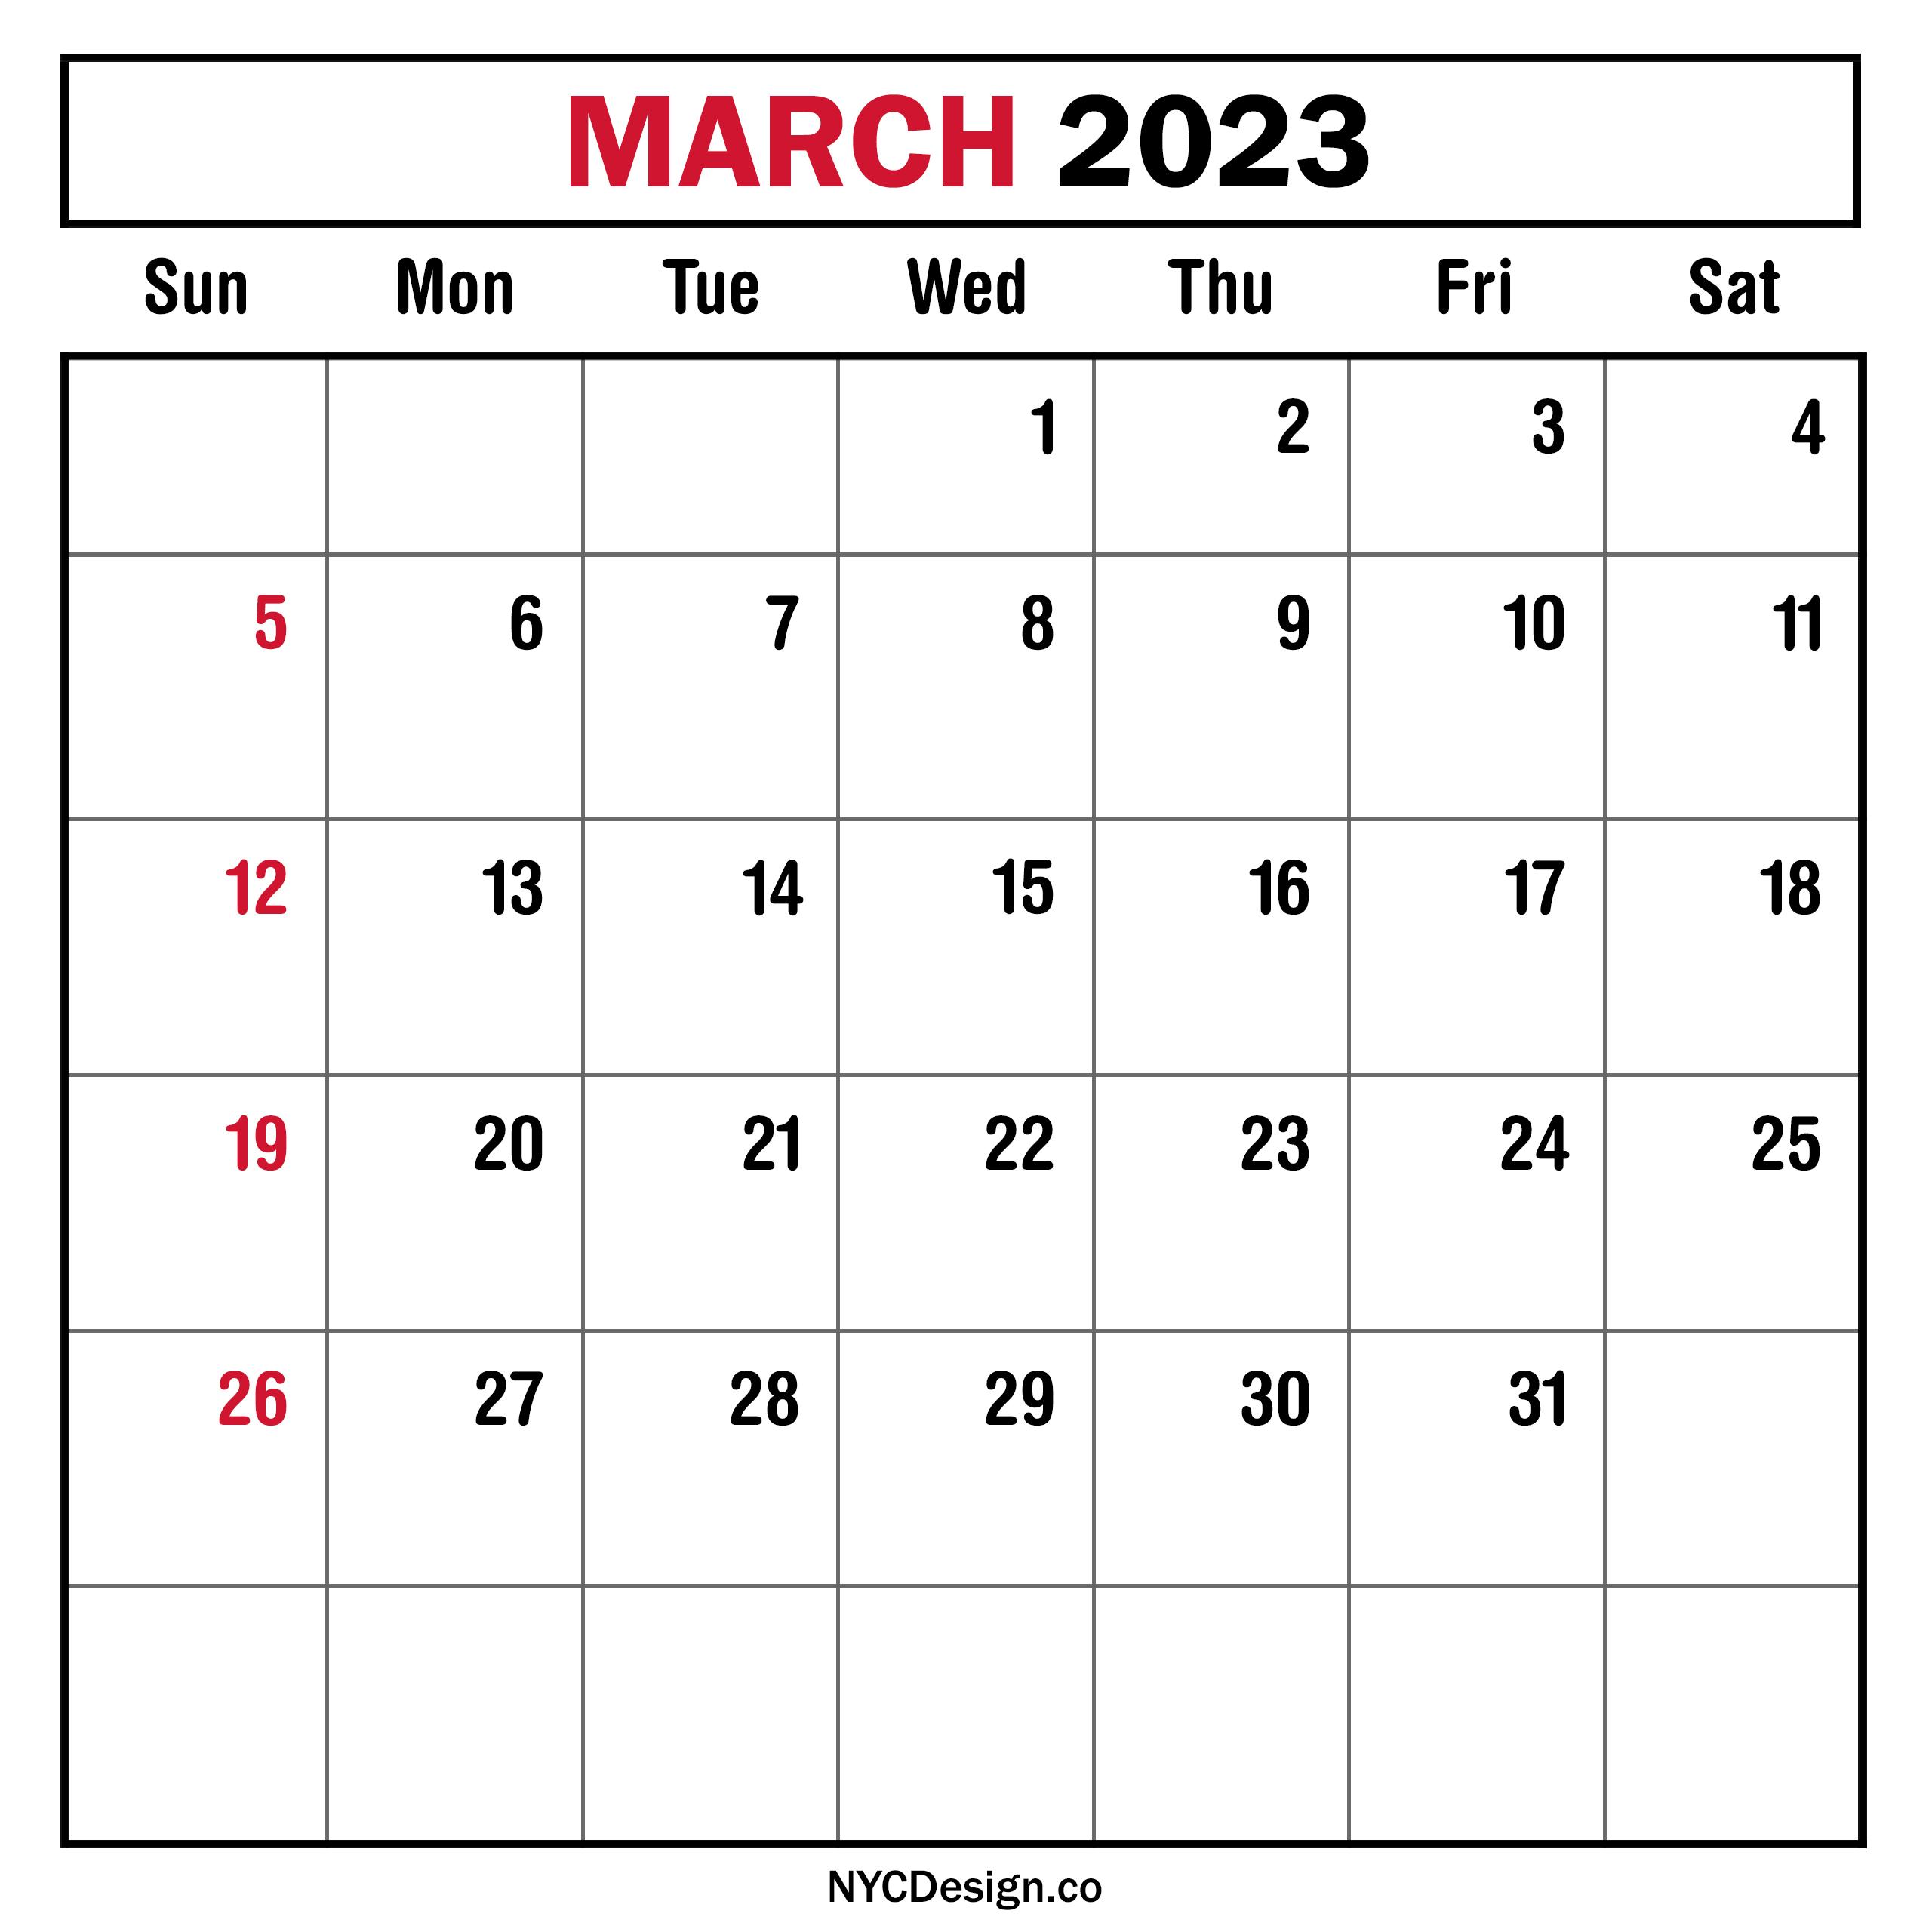 March 2023 Monthly Calendar with US Holidays, Planner, Printable Free ...